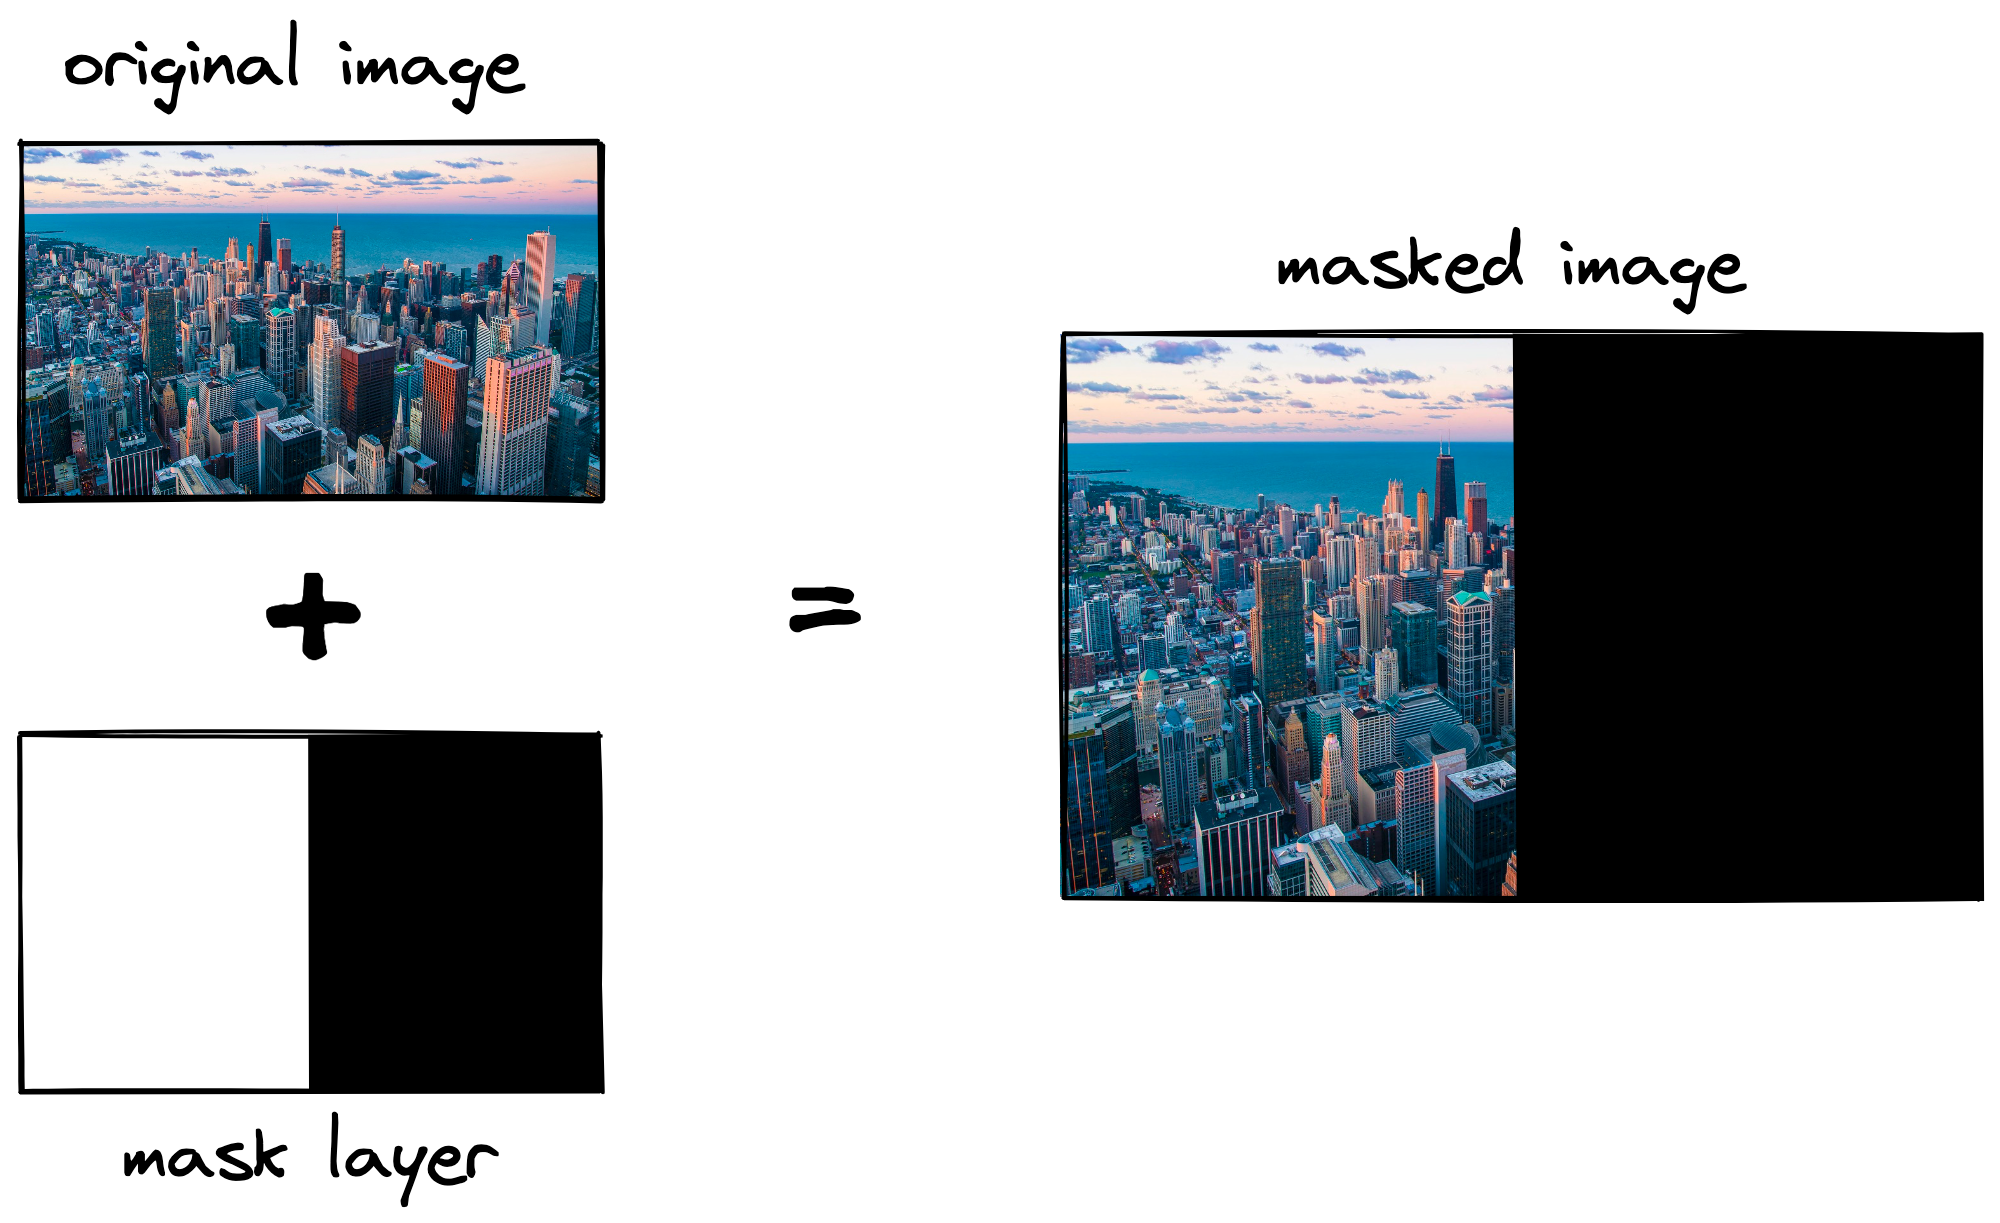 Example of how the masking layer works to “hide” part of an image.